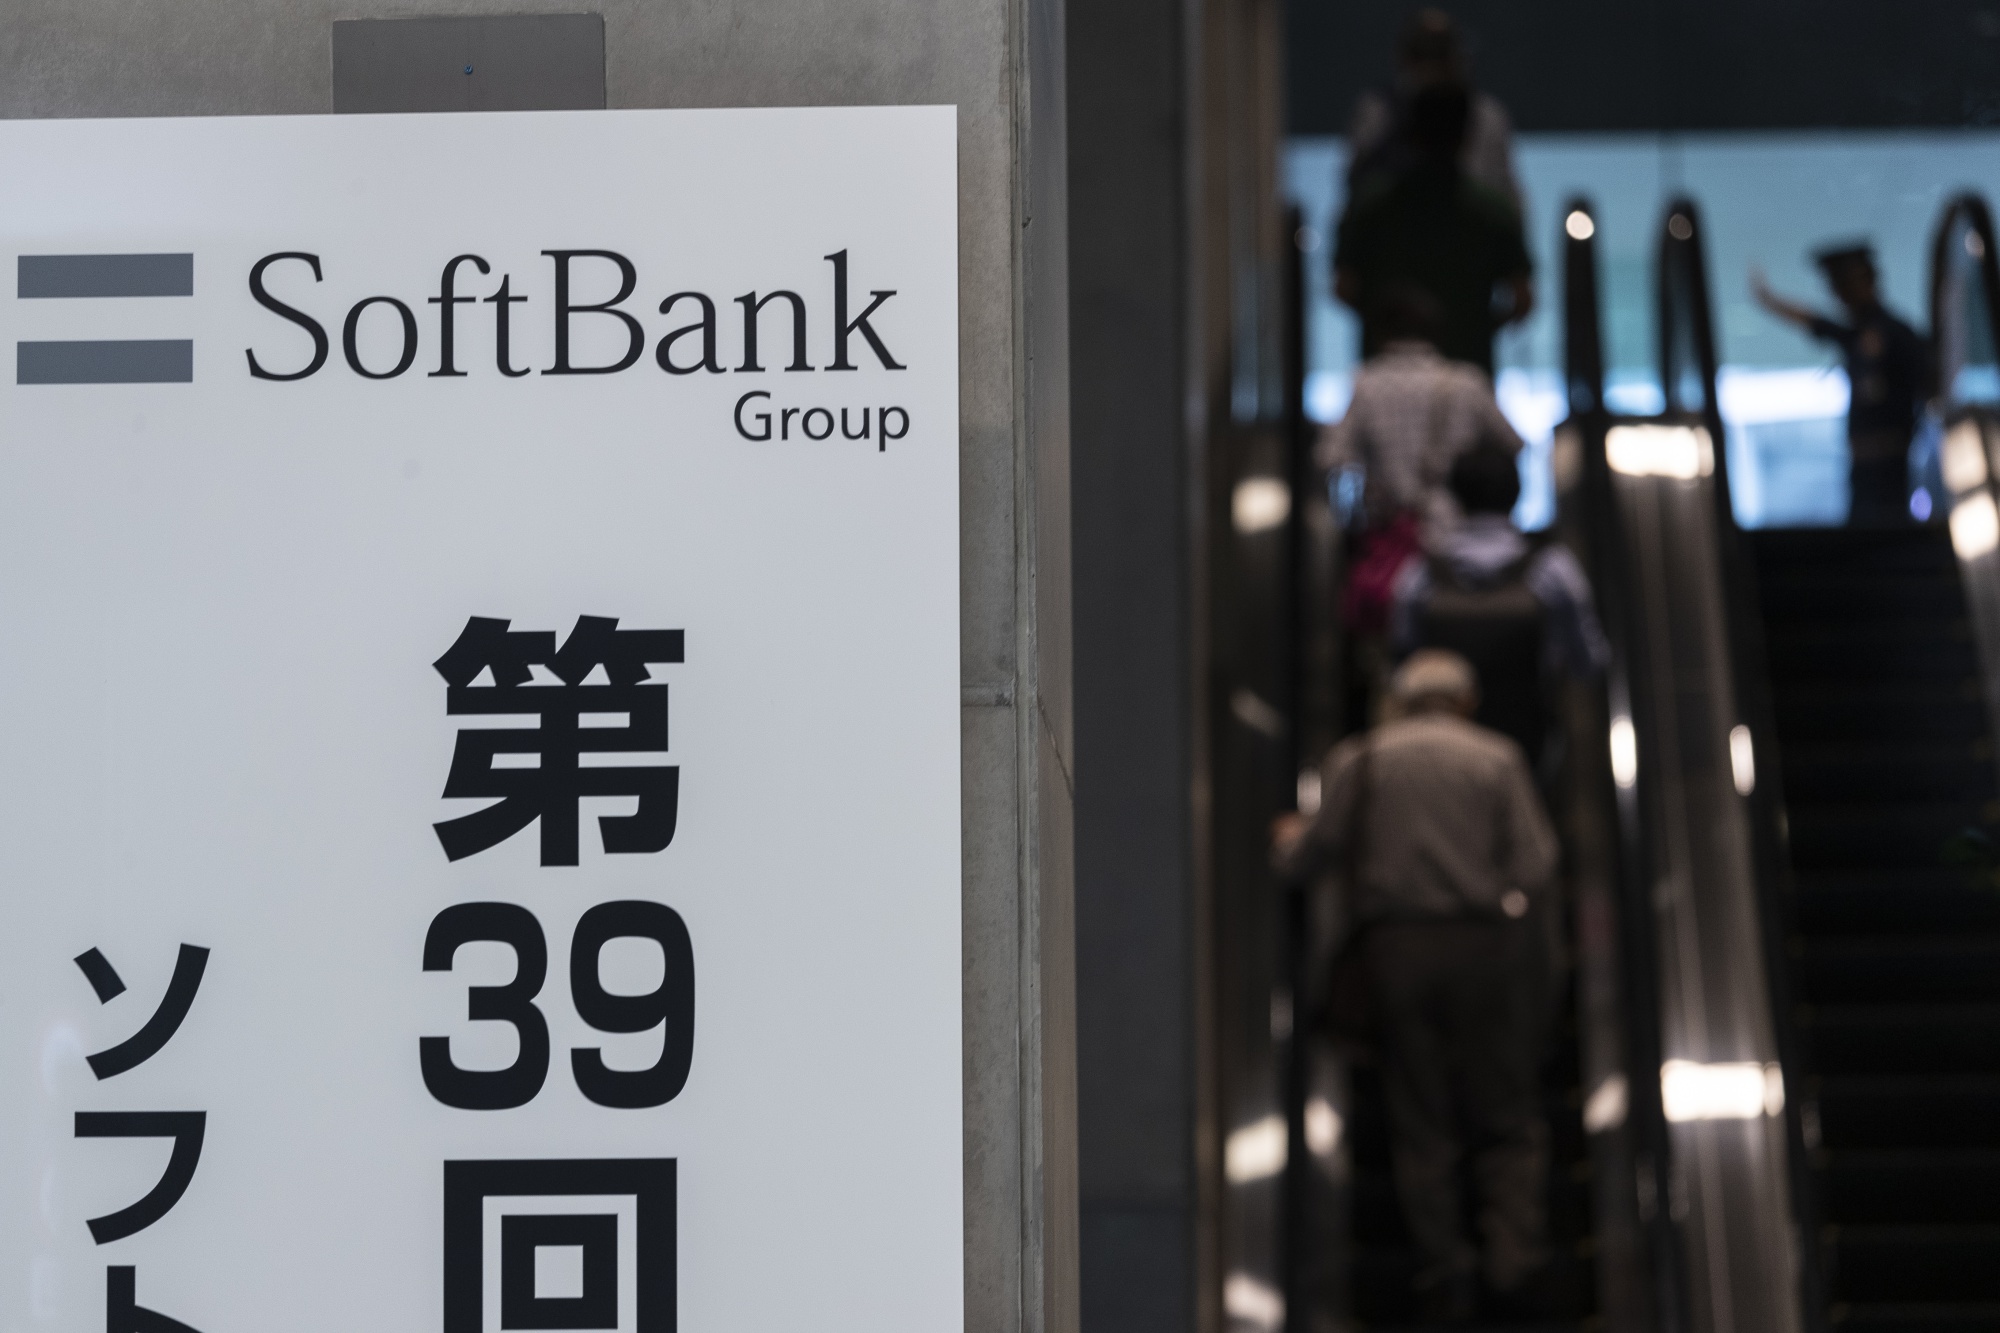 The entrance to the SoftBank Group Corp. annual general meeting in Tokyo.